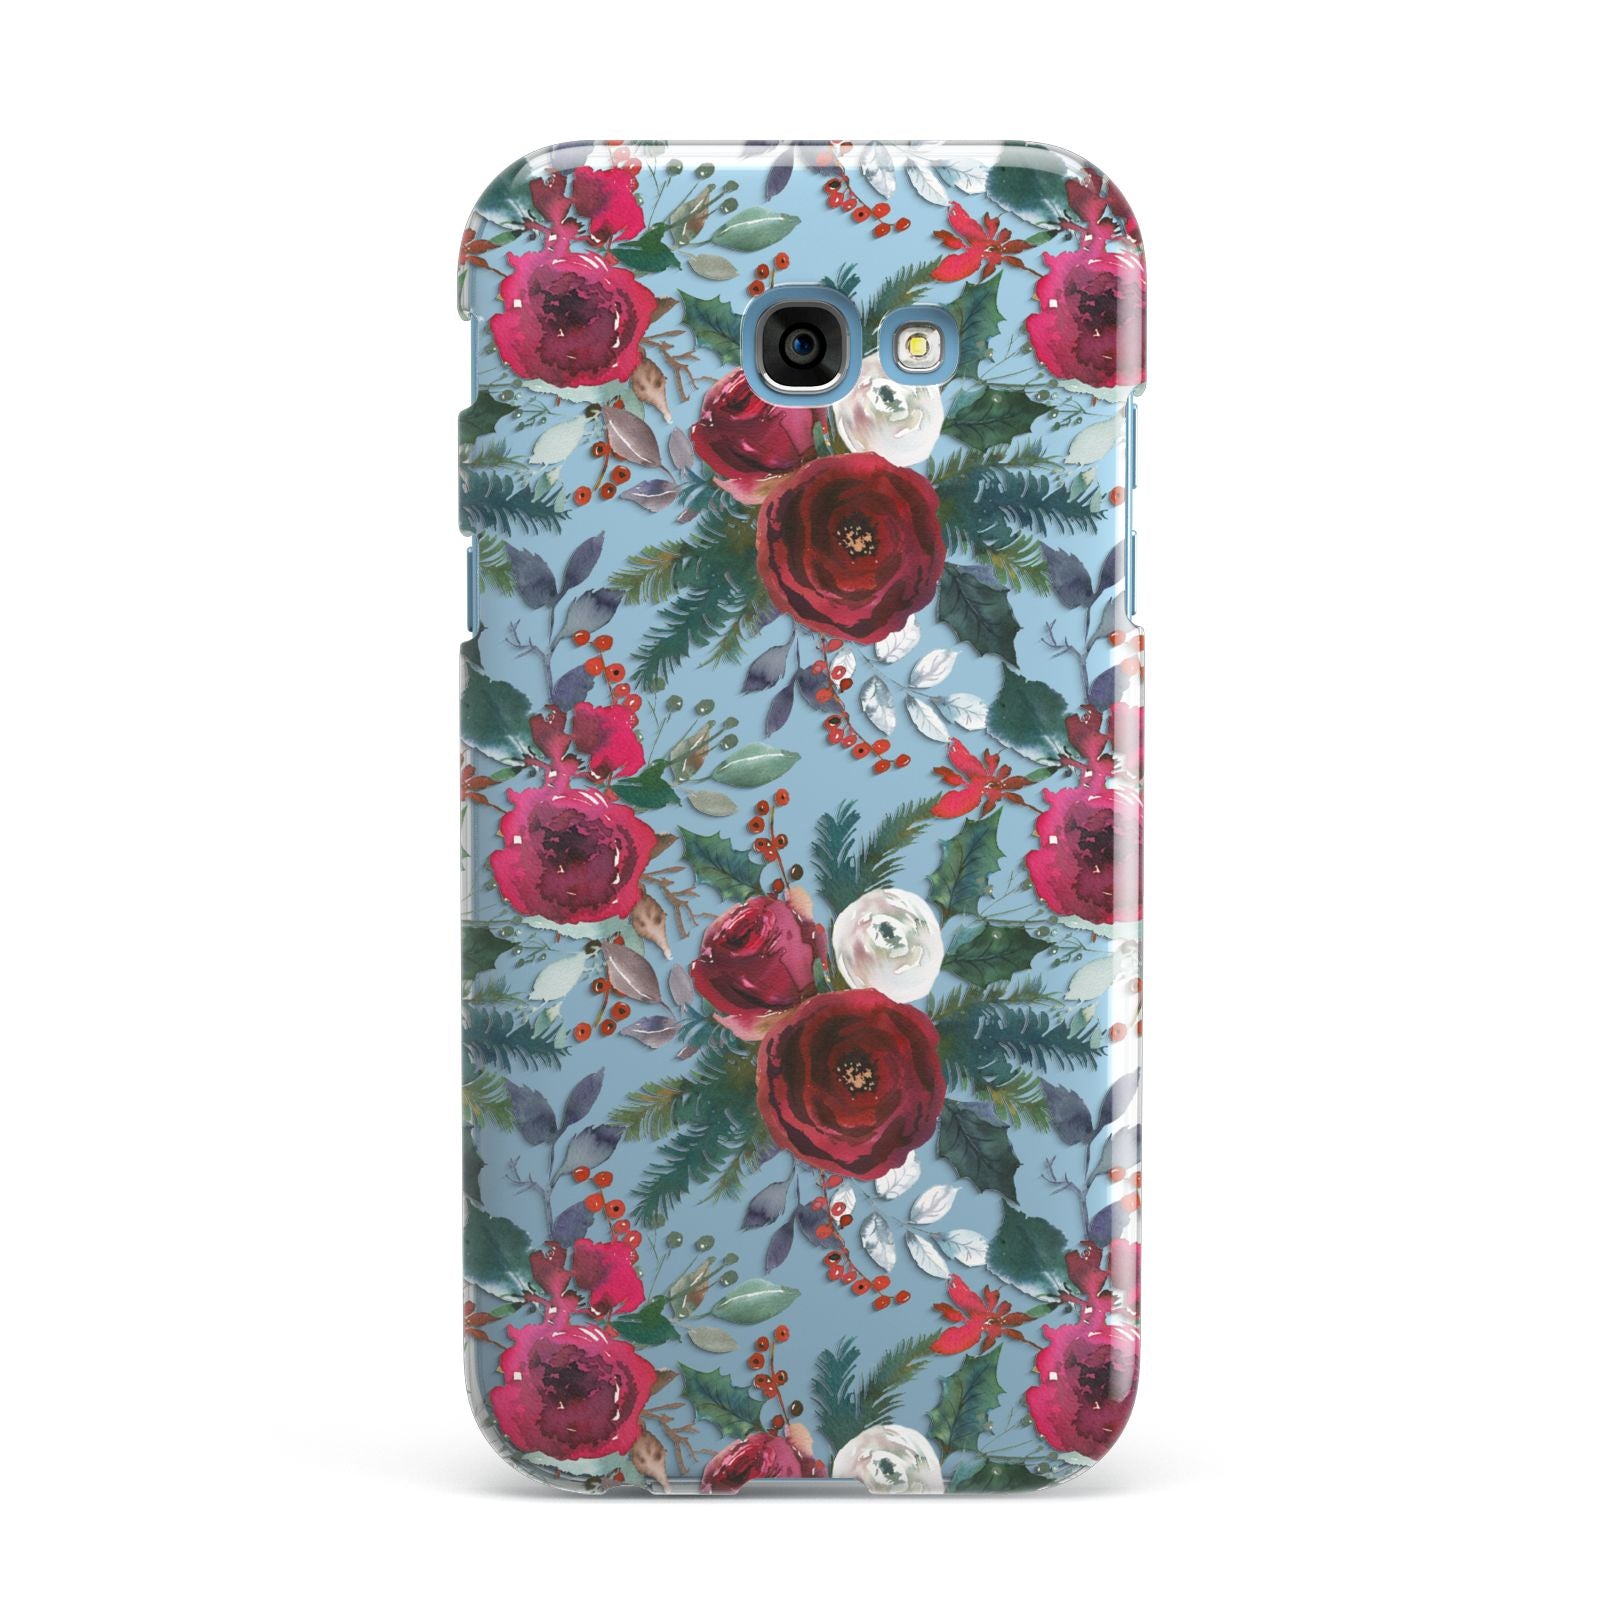 Christmas Floral Pattern Samsung Galaxy A7 2017 Case